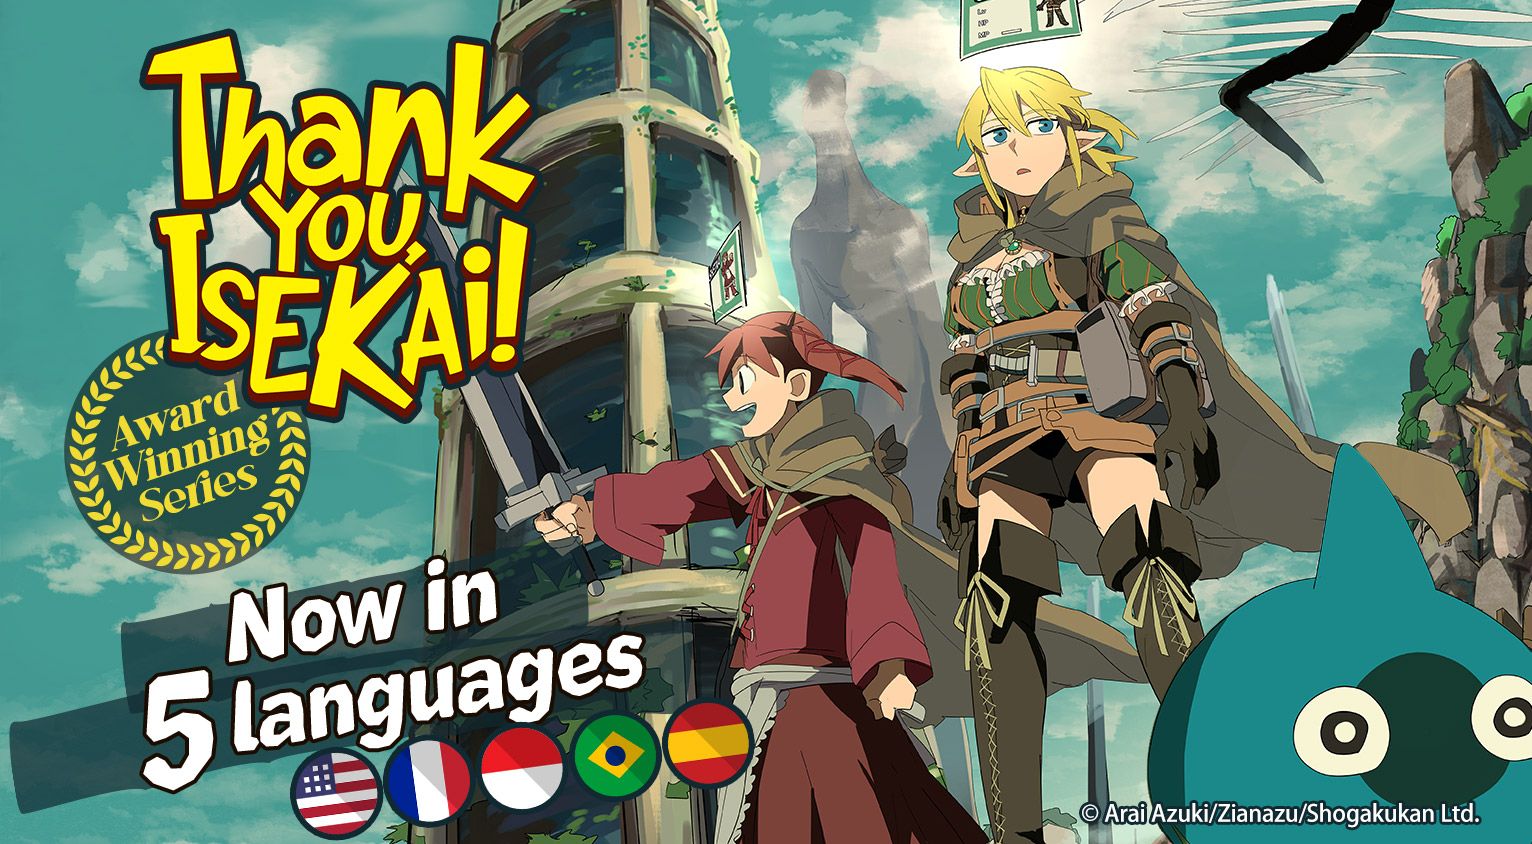 “Thank You, Isekai!” Now in Spanish, French, Brazilian Portuguese, and Indonesian!